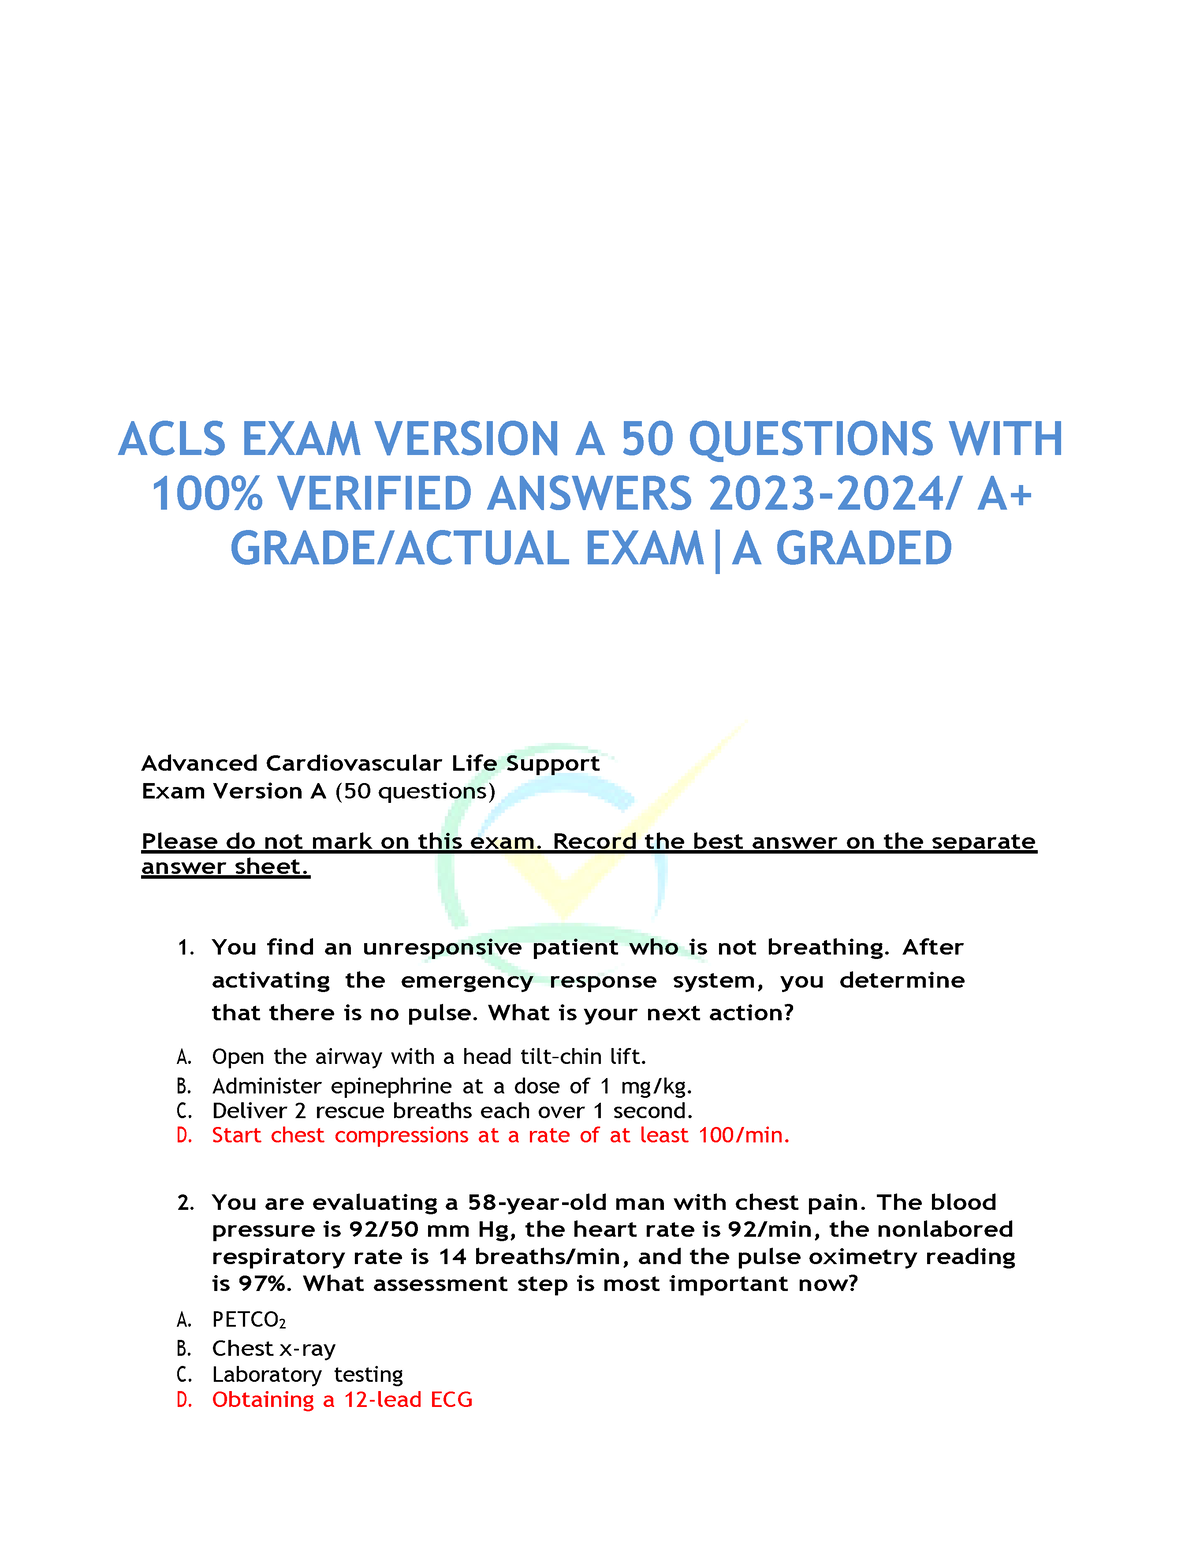 2 acls exam version a ACLS EXAM VERSION A 50 QUESTIONS WITH 100